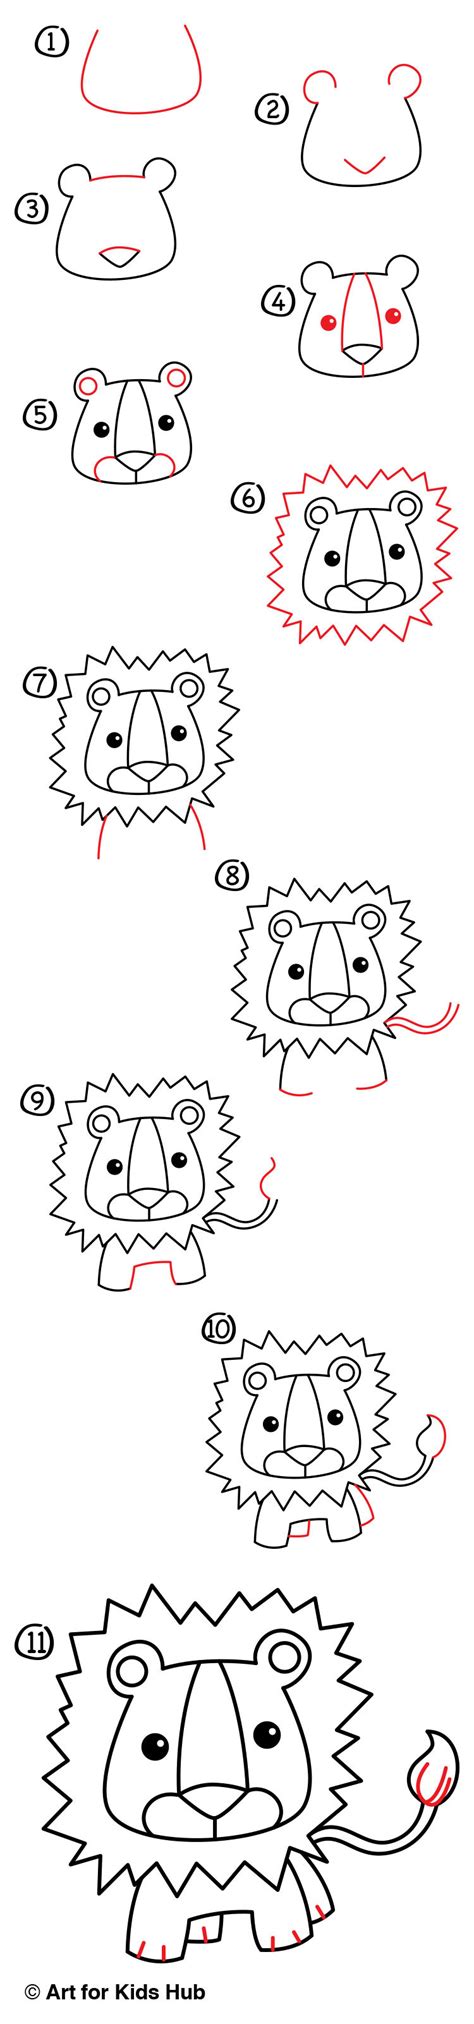 Draw this cute lion by following this drawing lesson. How To Draw A Cartoon Lion - Art For Kids Hub